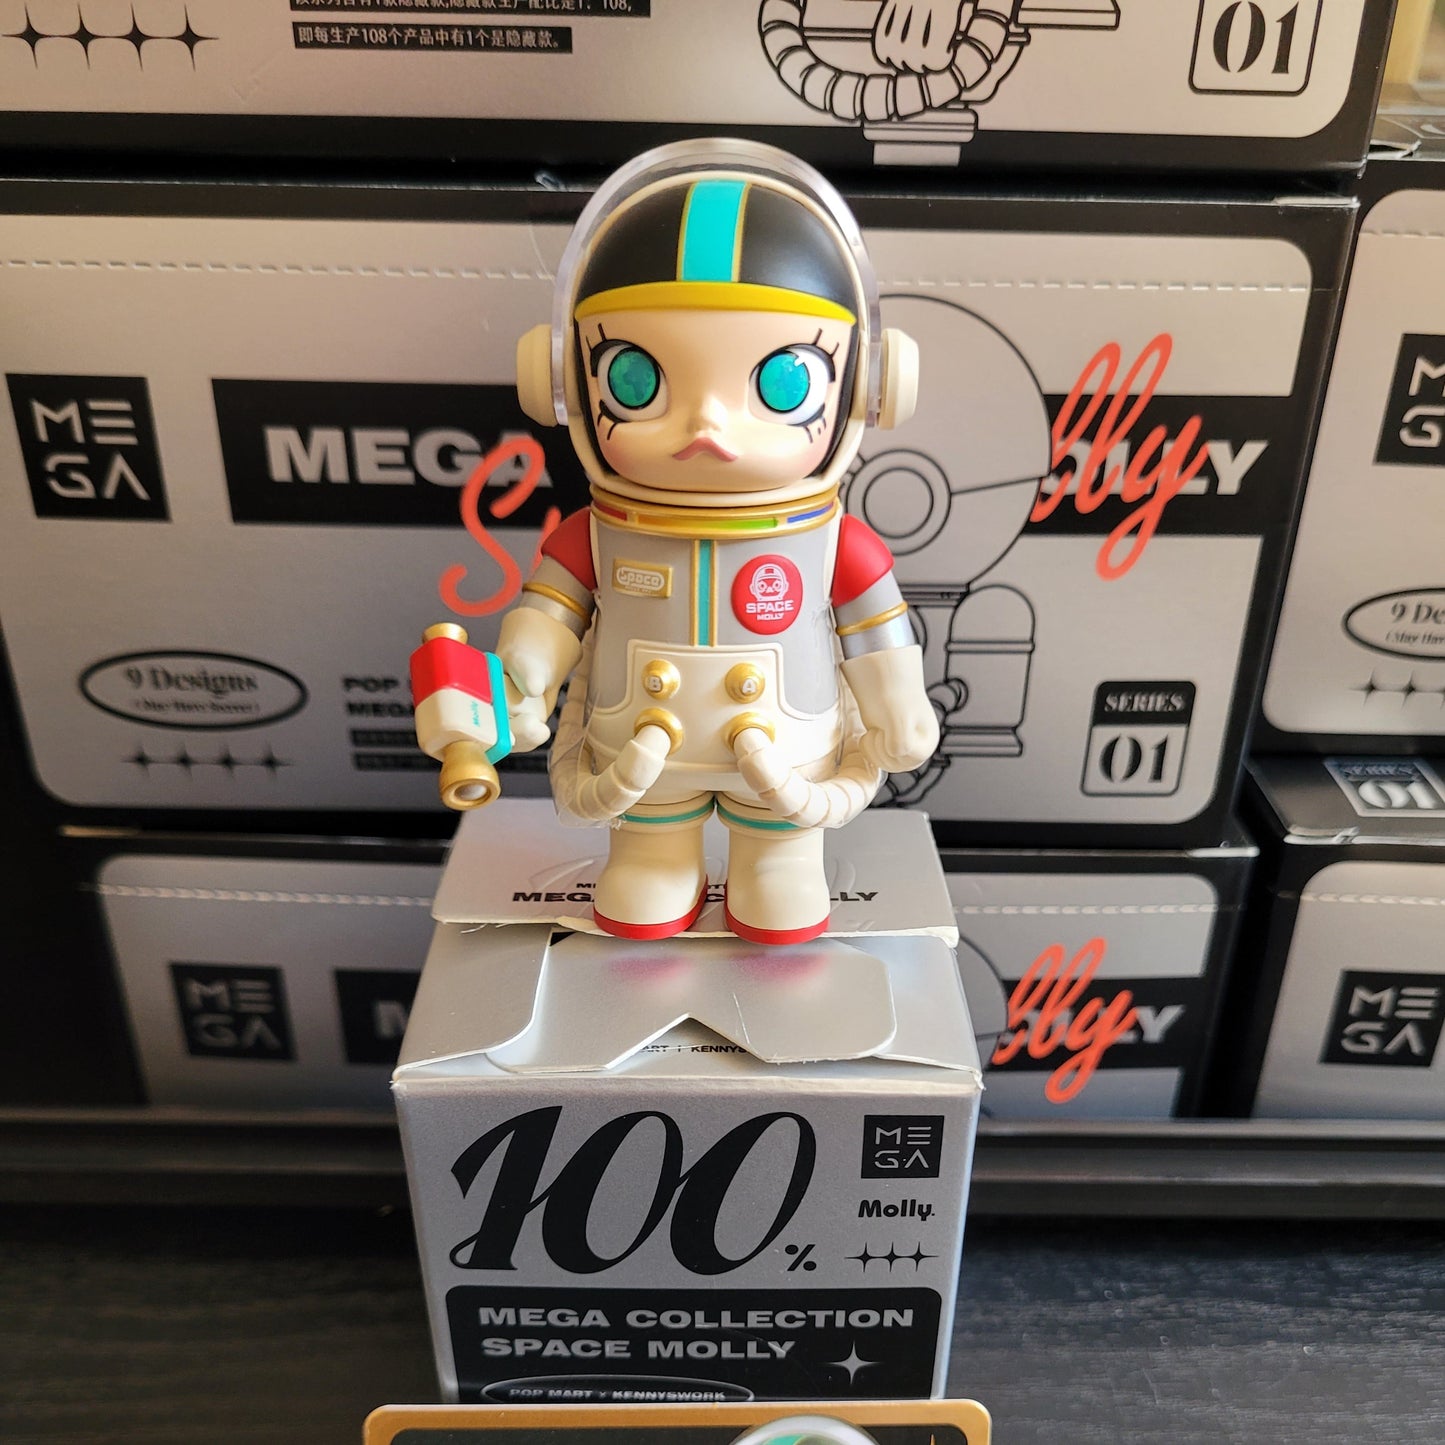 POPMART KENNYSWORK Mega Collection 100% Space Molly (#10 Earth Daughter) Secret Chase